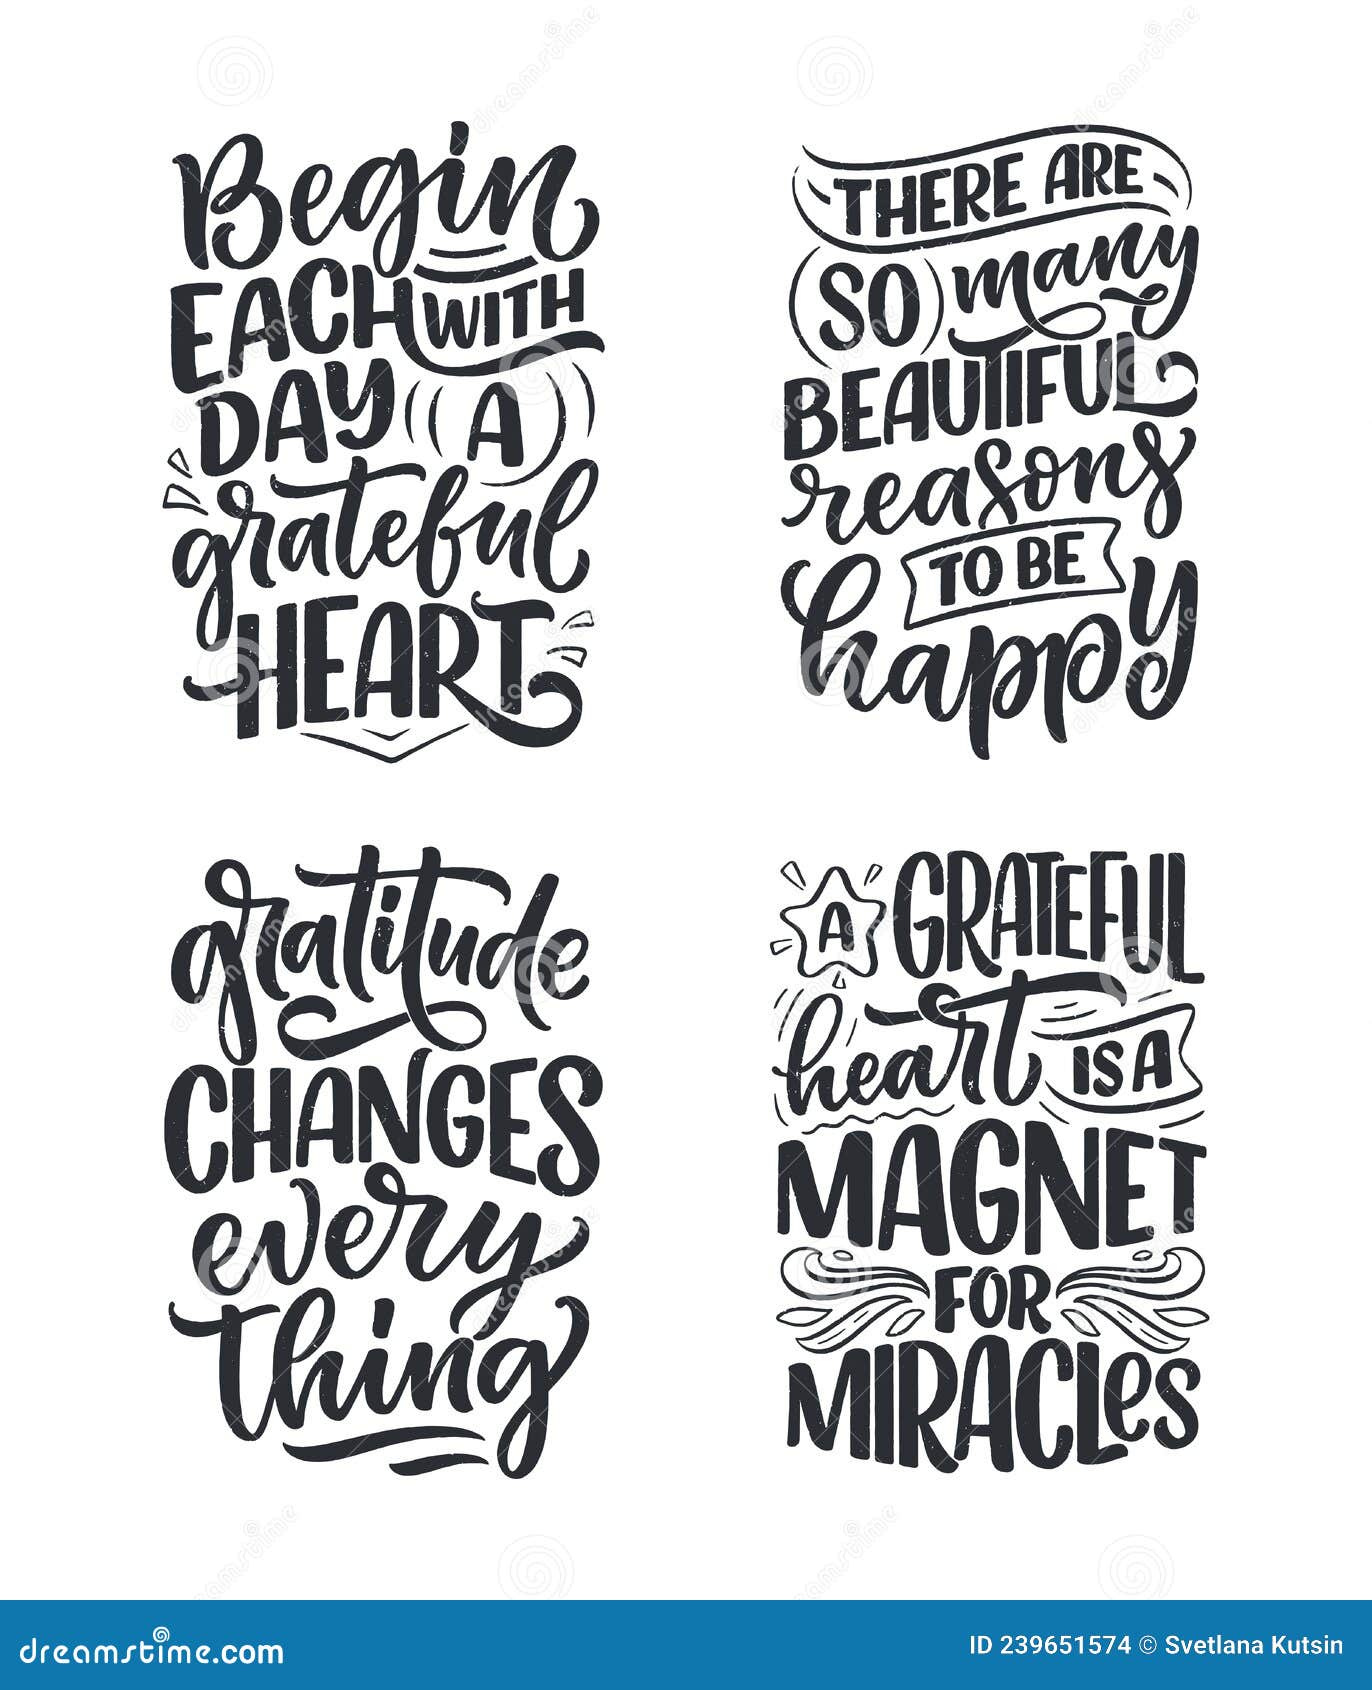 It Is What It Is - Inspirational wisdom quote handwritten with black ink  and brush. Good for posters, t-shirts, prints, cards, banners. Hand  lettering, typographic element for your design. Stock Vector